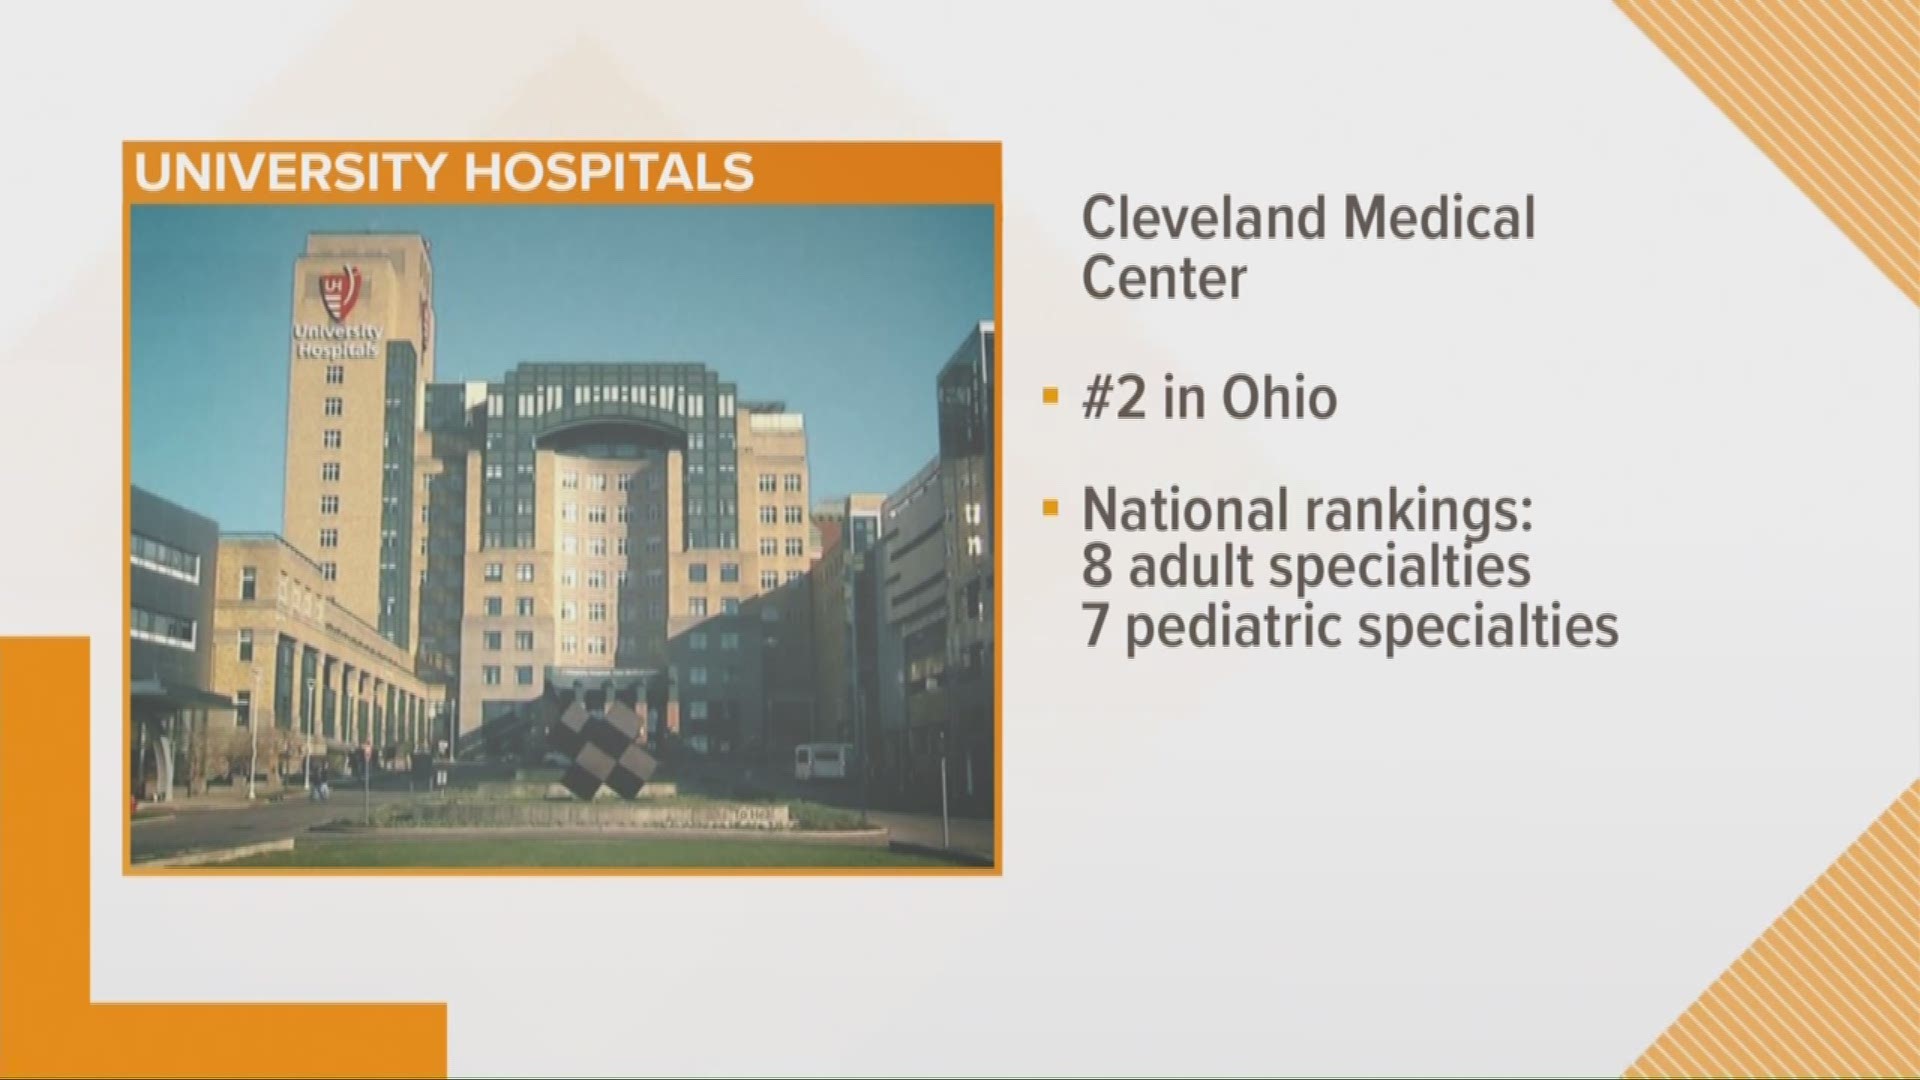 July 30, 2019: U.S. News & World Report's annual hospital rankings is giving the Cleveland Clinic and University Hospitals high marks. The 2019-20 rankings evaluated more than 4,500 medical centers nationwide, based on specialties, procedures and conditions. The Cleveland Clinic was ranked as the No. 4 hospital in America. and the No. 1 heart care hospital.